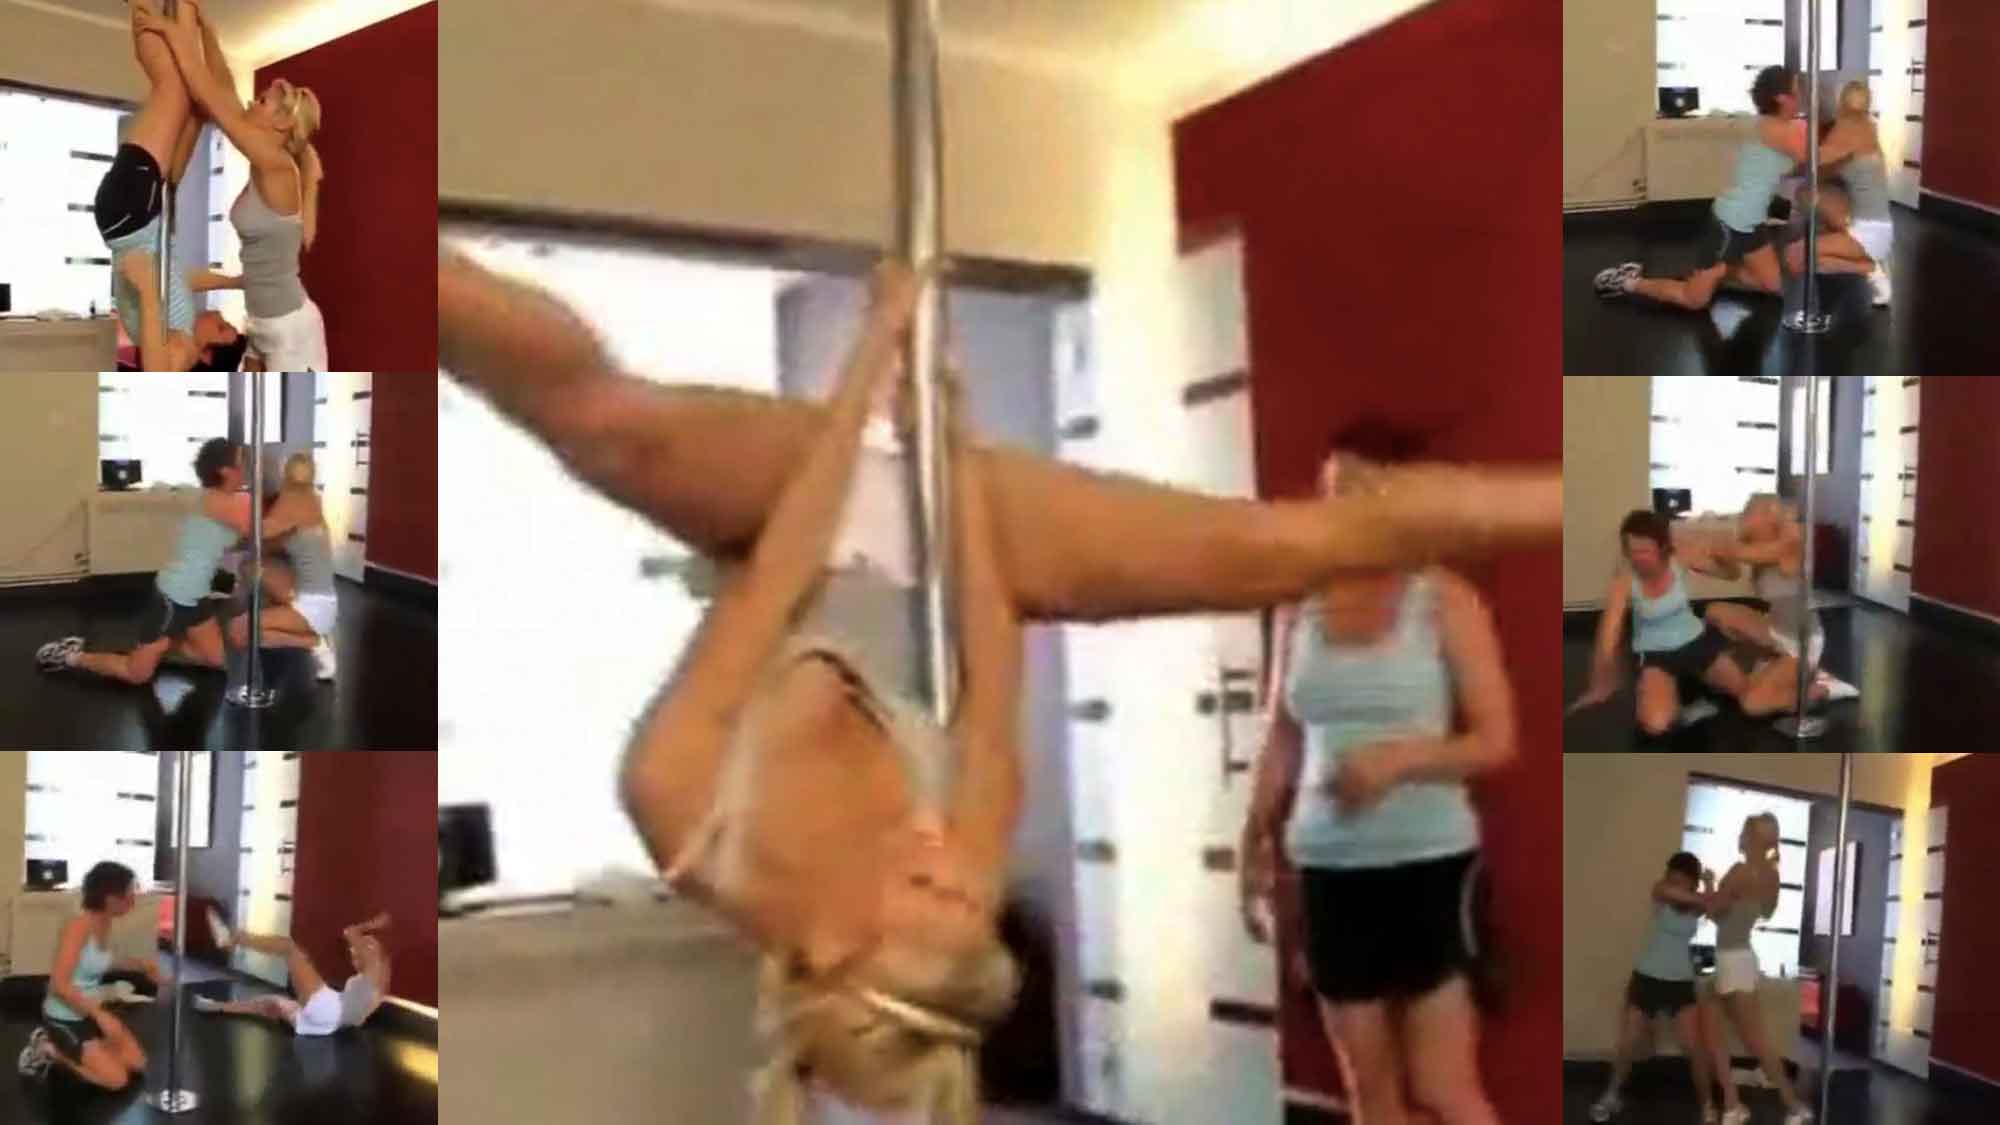 Friendly Pole Dancing Lesson Between Strippers Ends In A Cat Fight